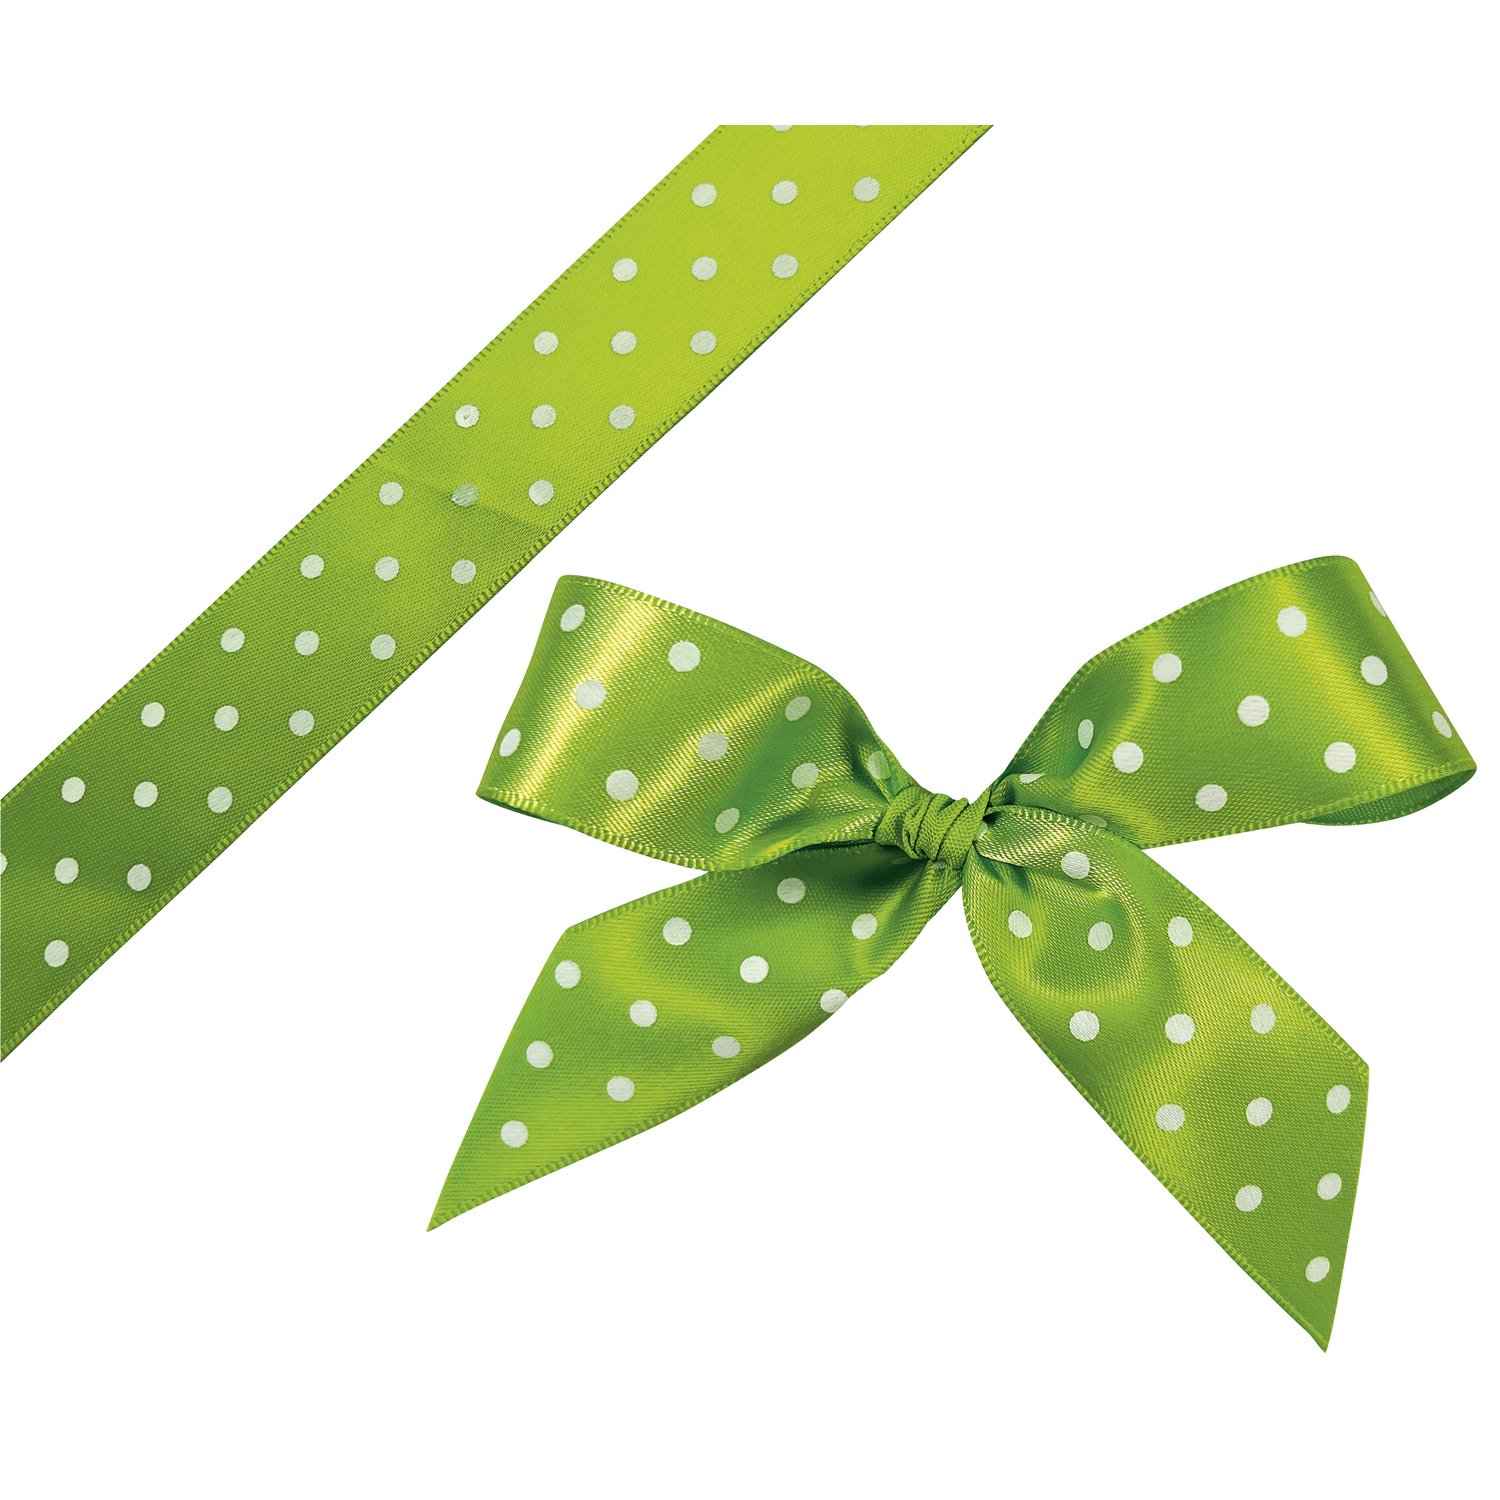 Green single face satin woven edge ribbon with white dots - 23mmx20m